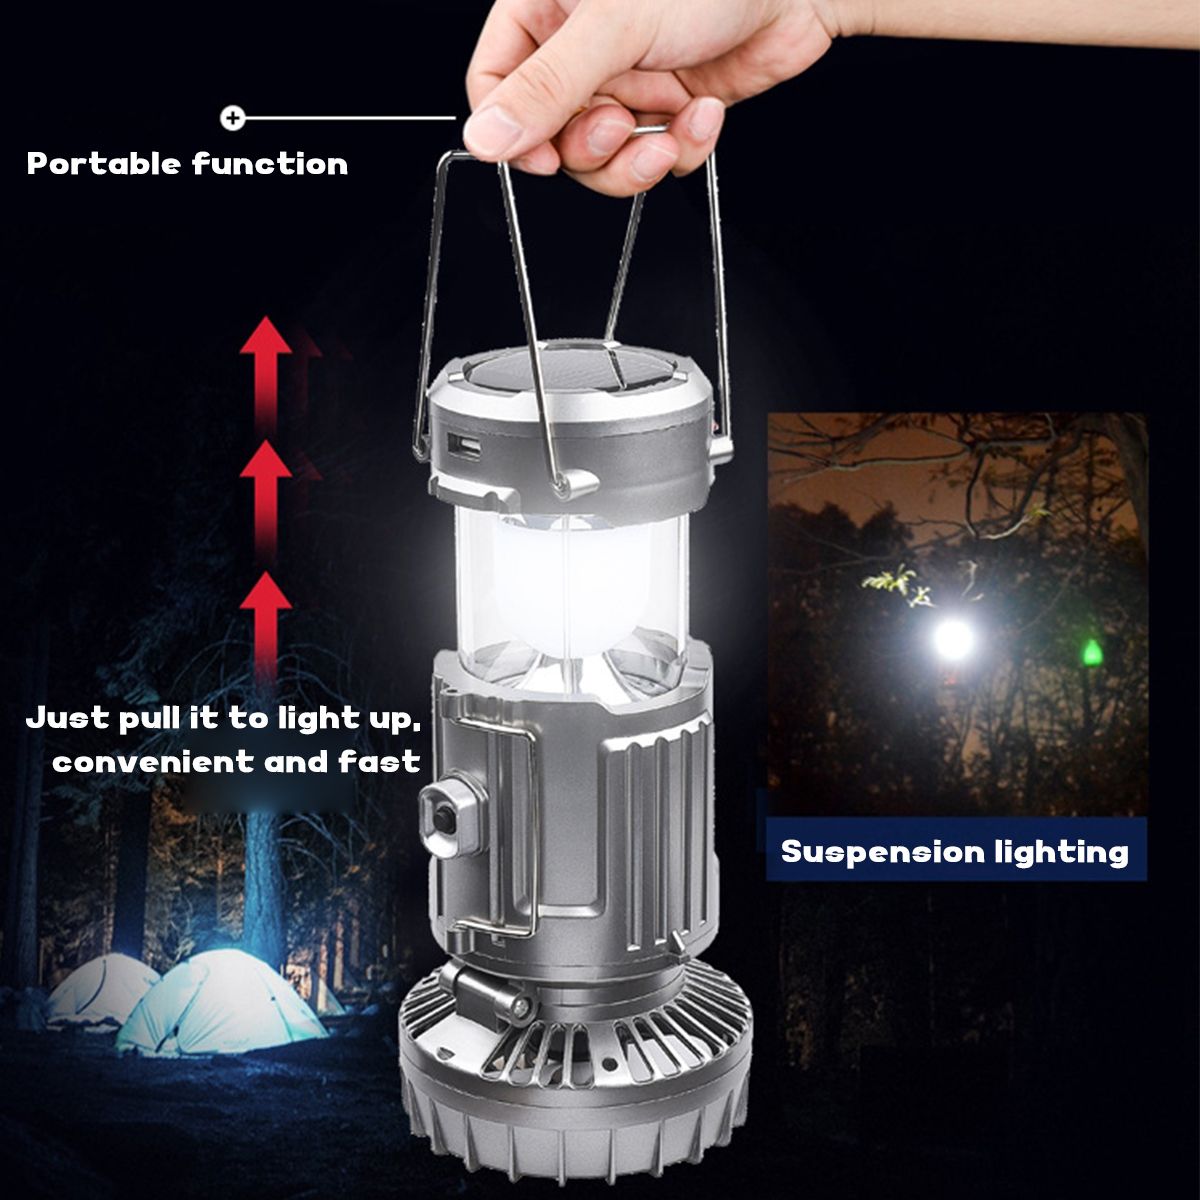 Solar-Outdoor-Fan-Rechargeable-Camping-Lantern-Light-LED-Hand-Lamp-Flashlight-1763838